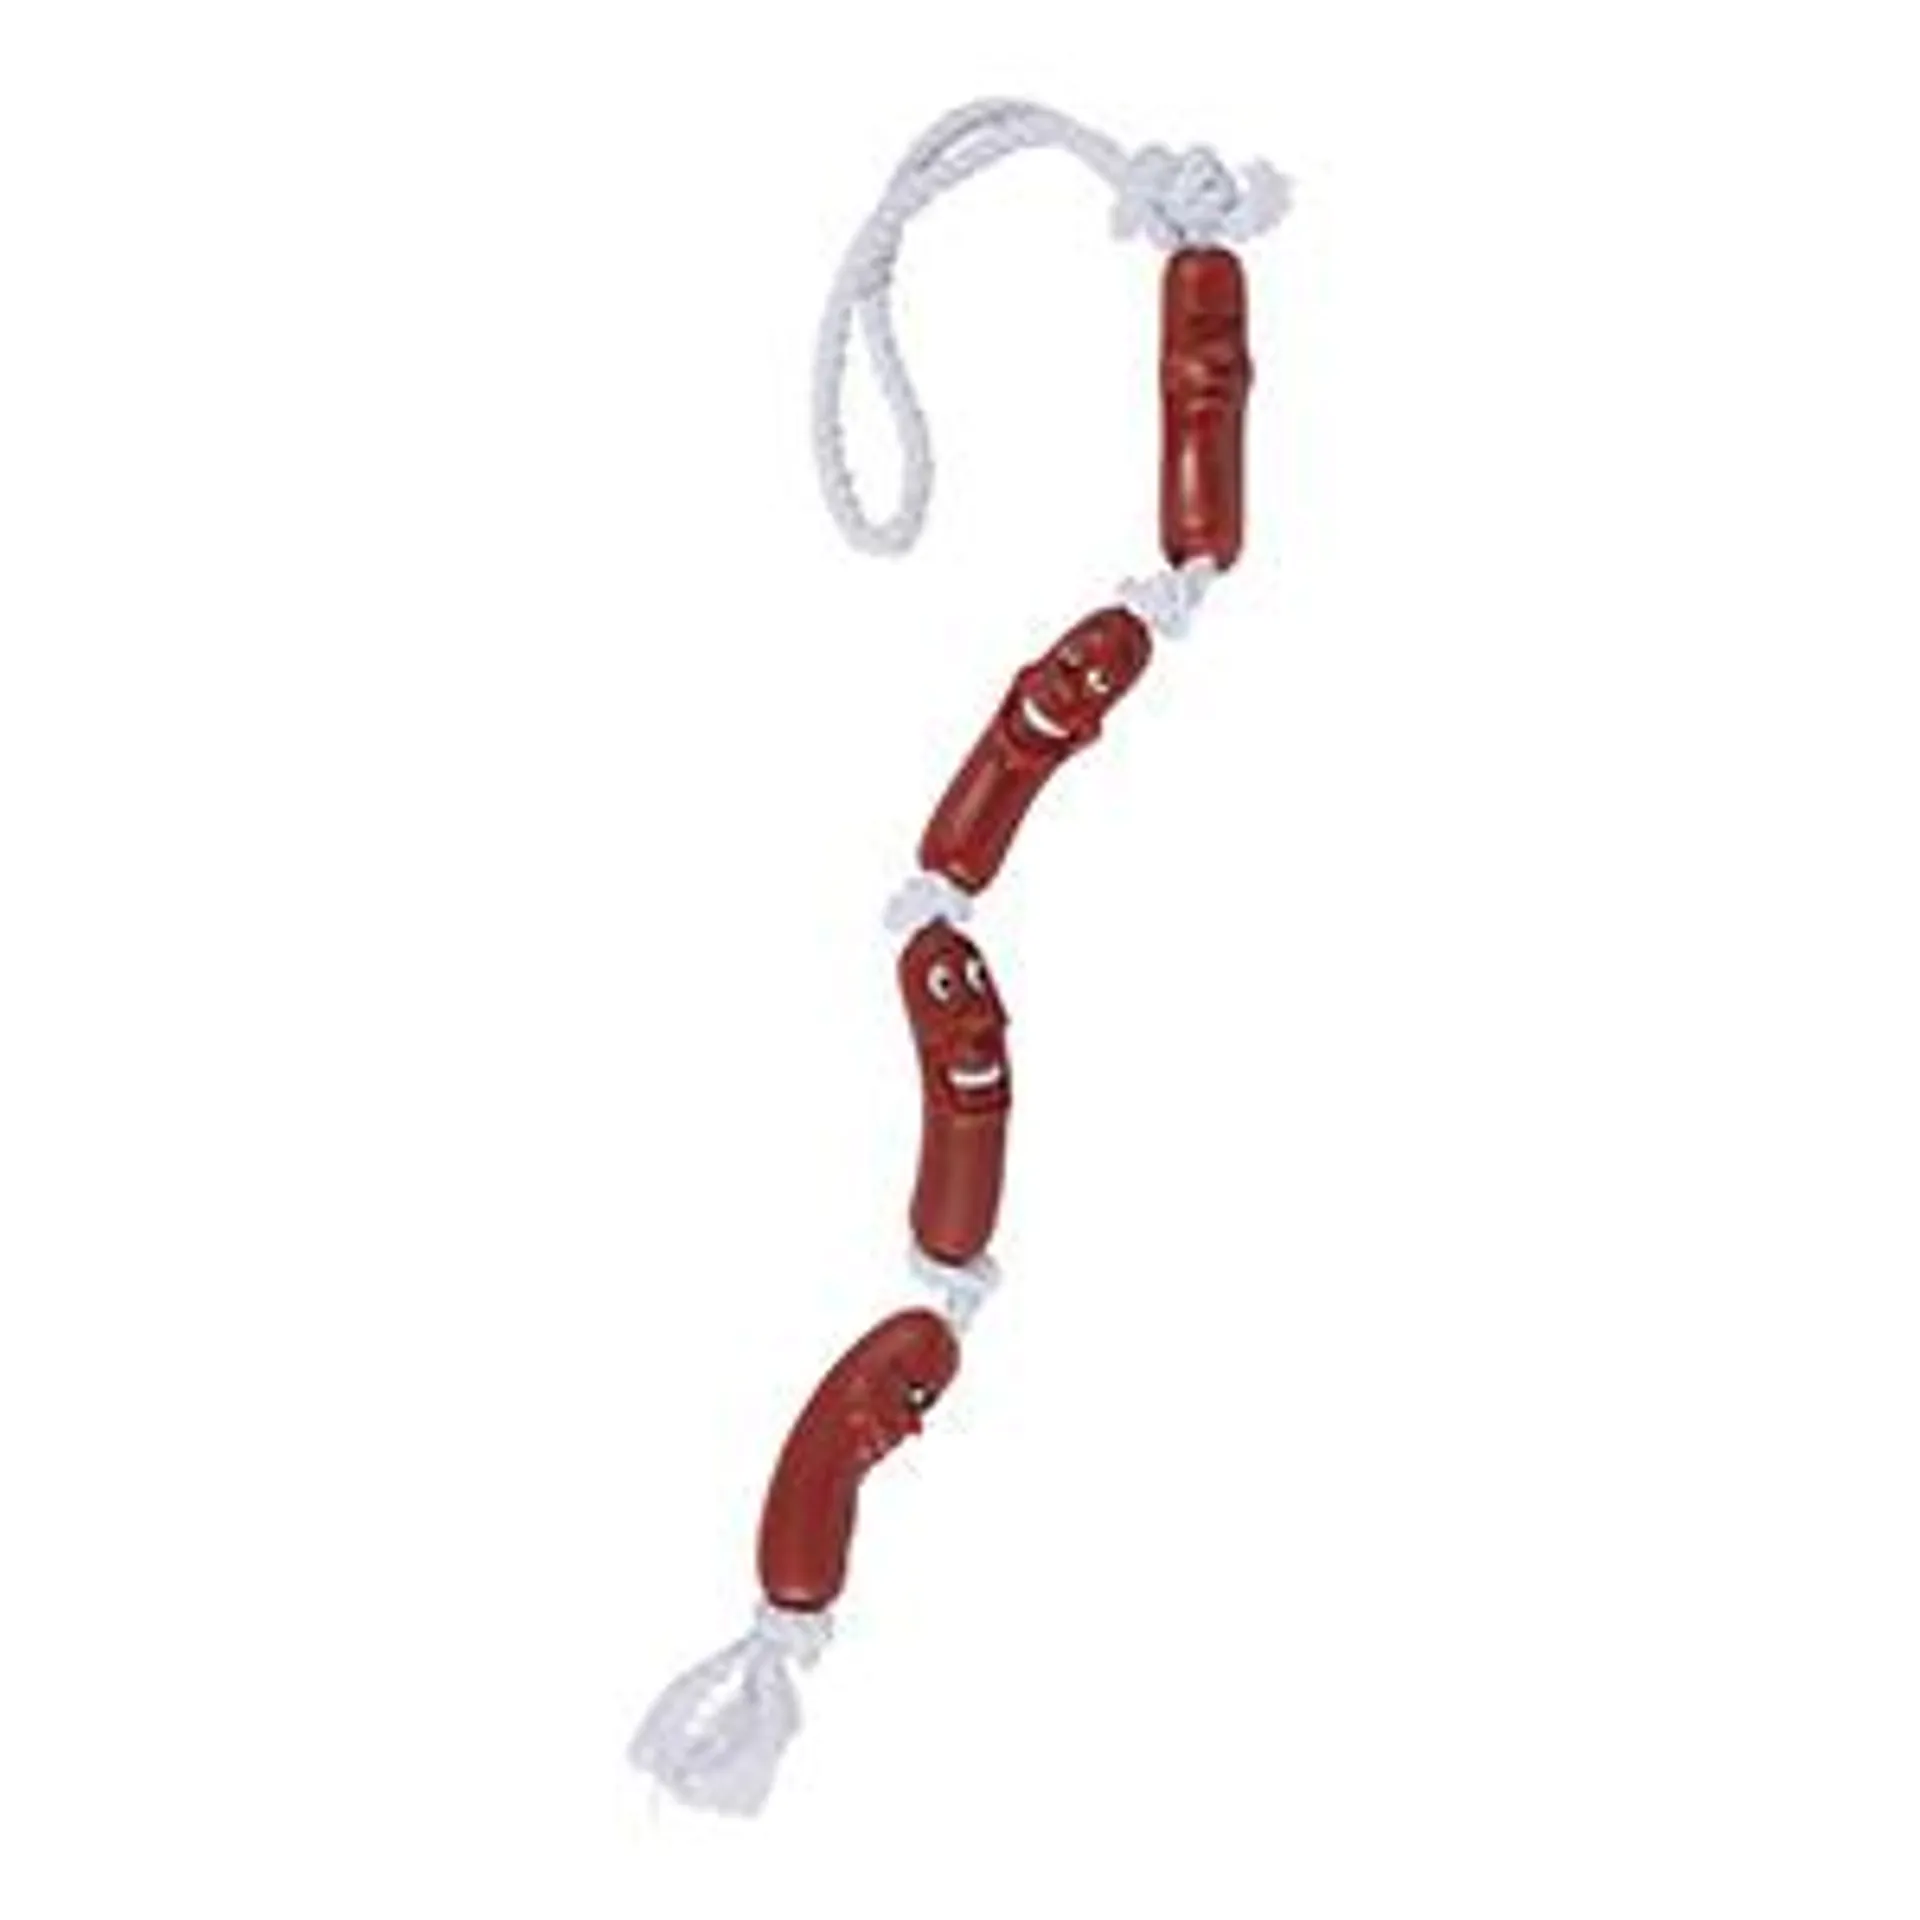 Pets at Home Vinyl Sausage Rope Dog Toy Brown